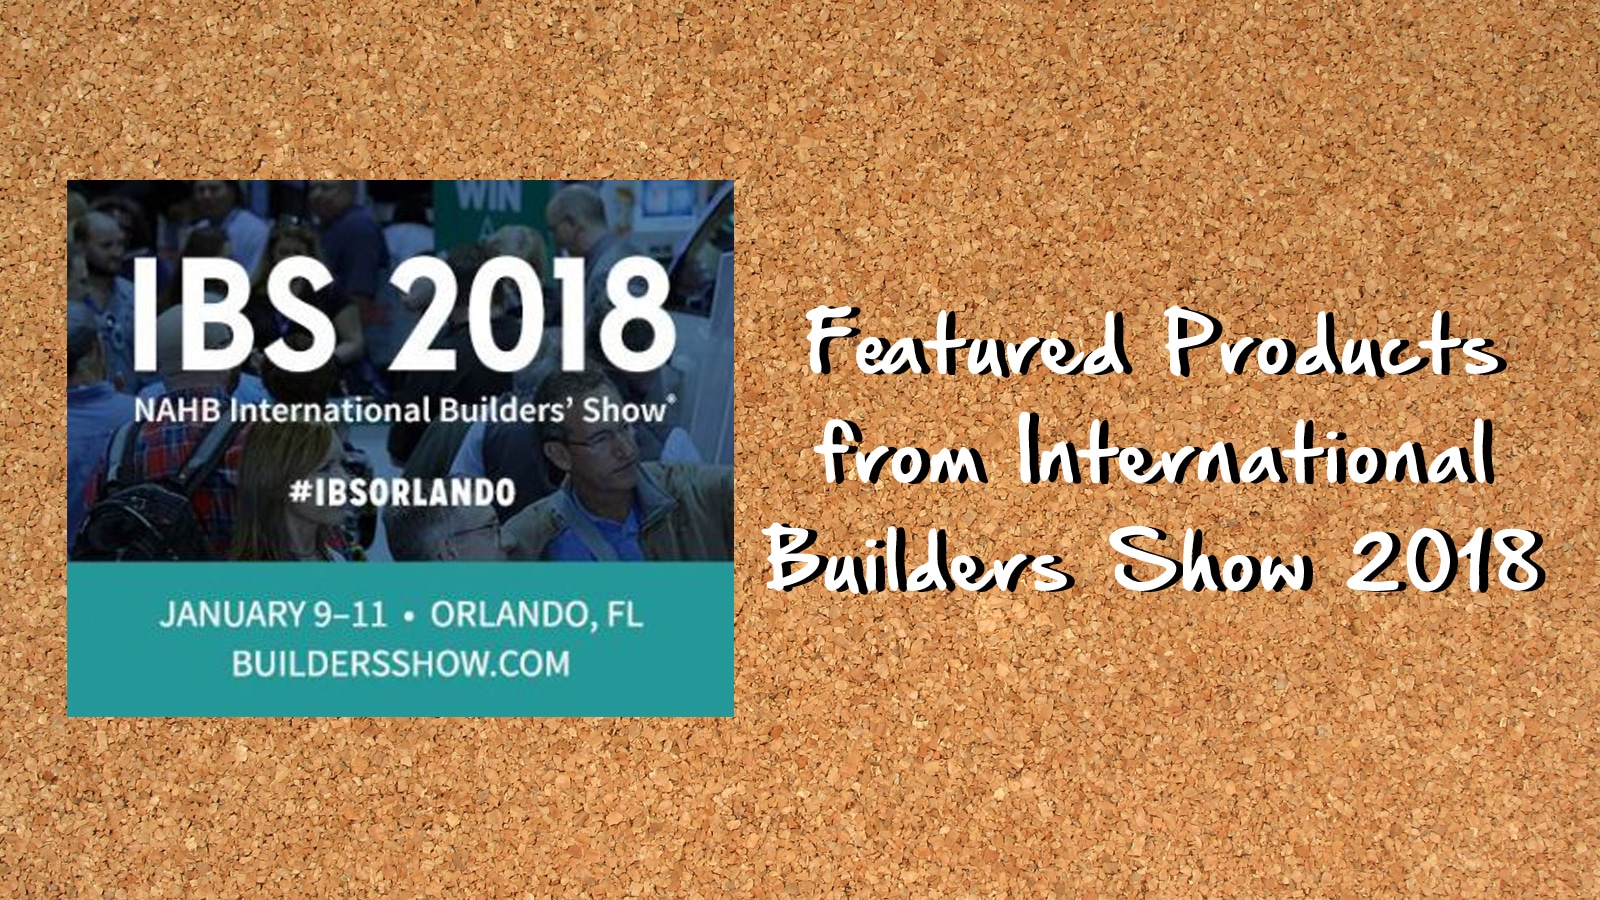 International Builders’ Show Featured Products 2018